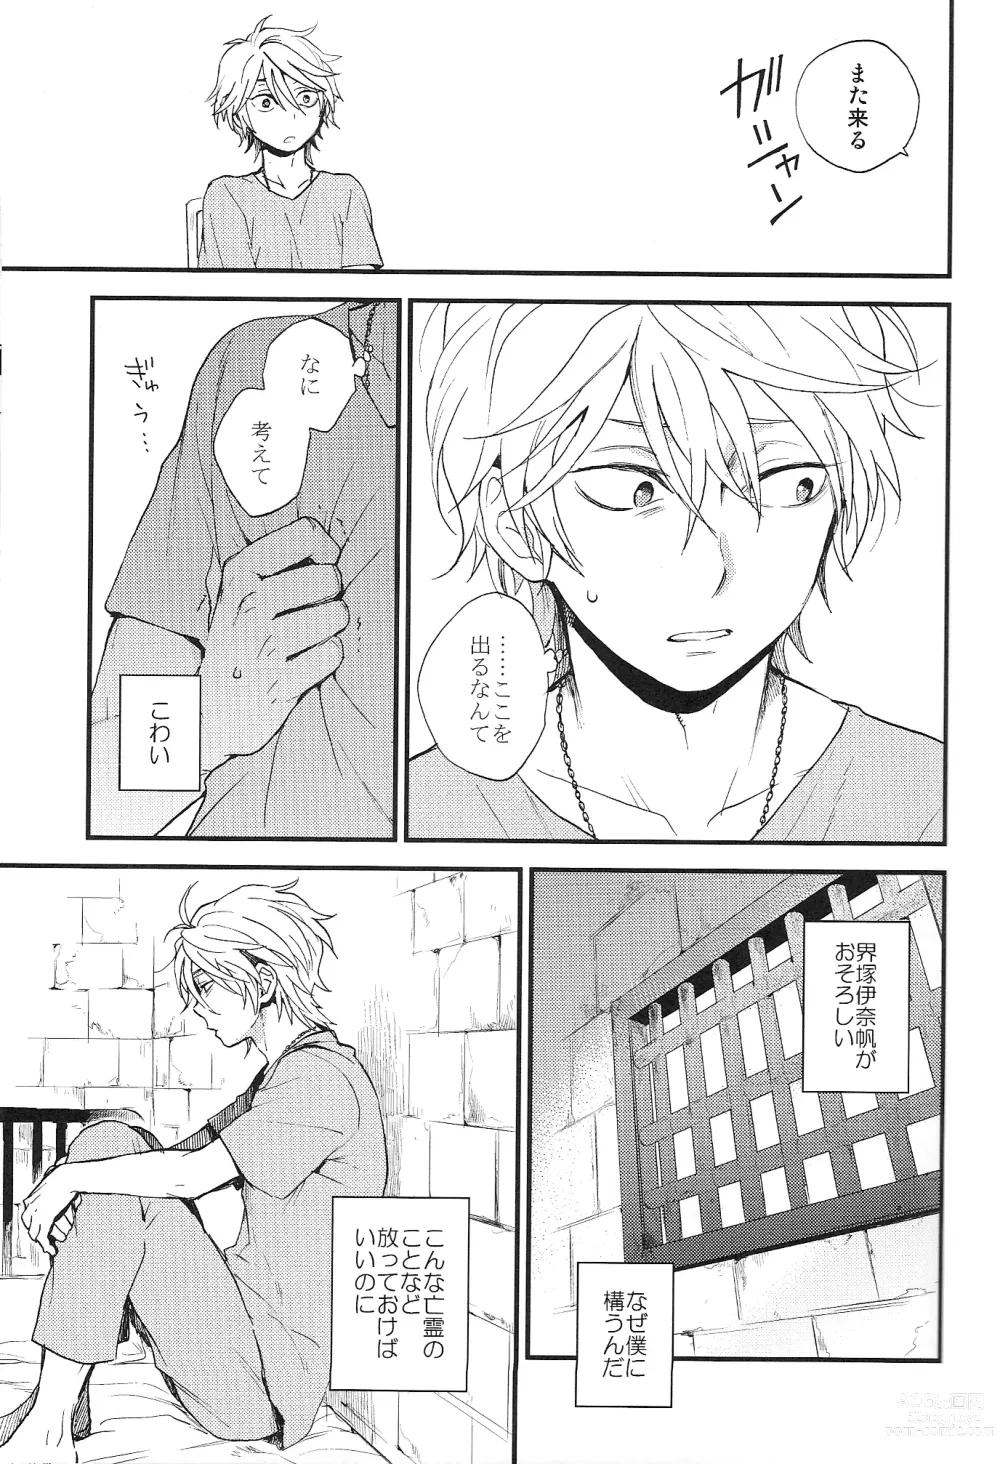 Page 8 of doujinshi 0 Distance